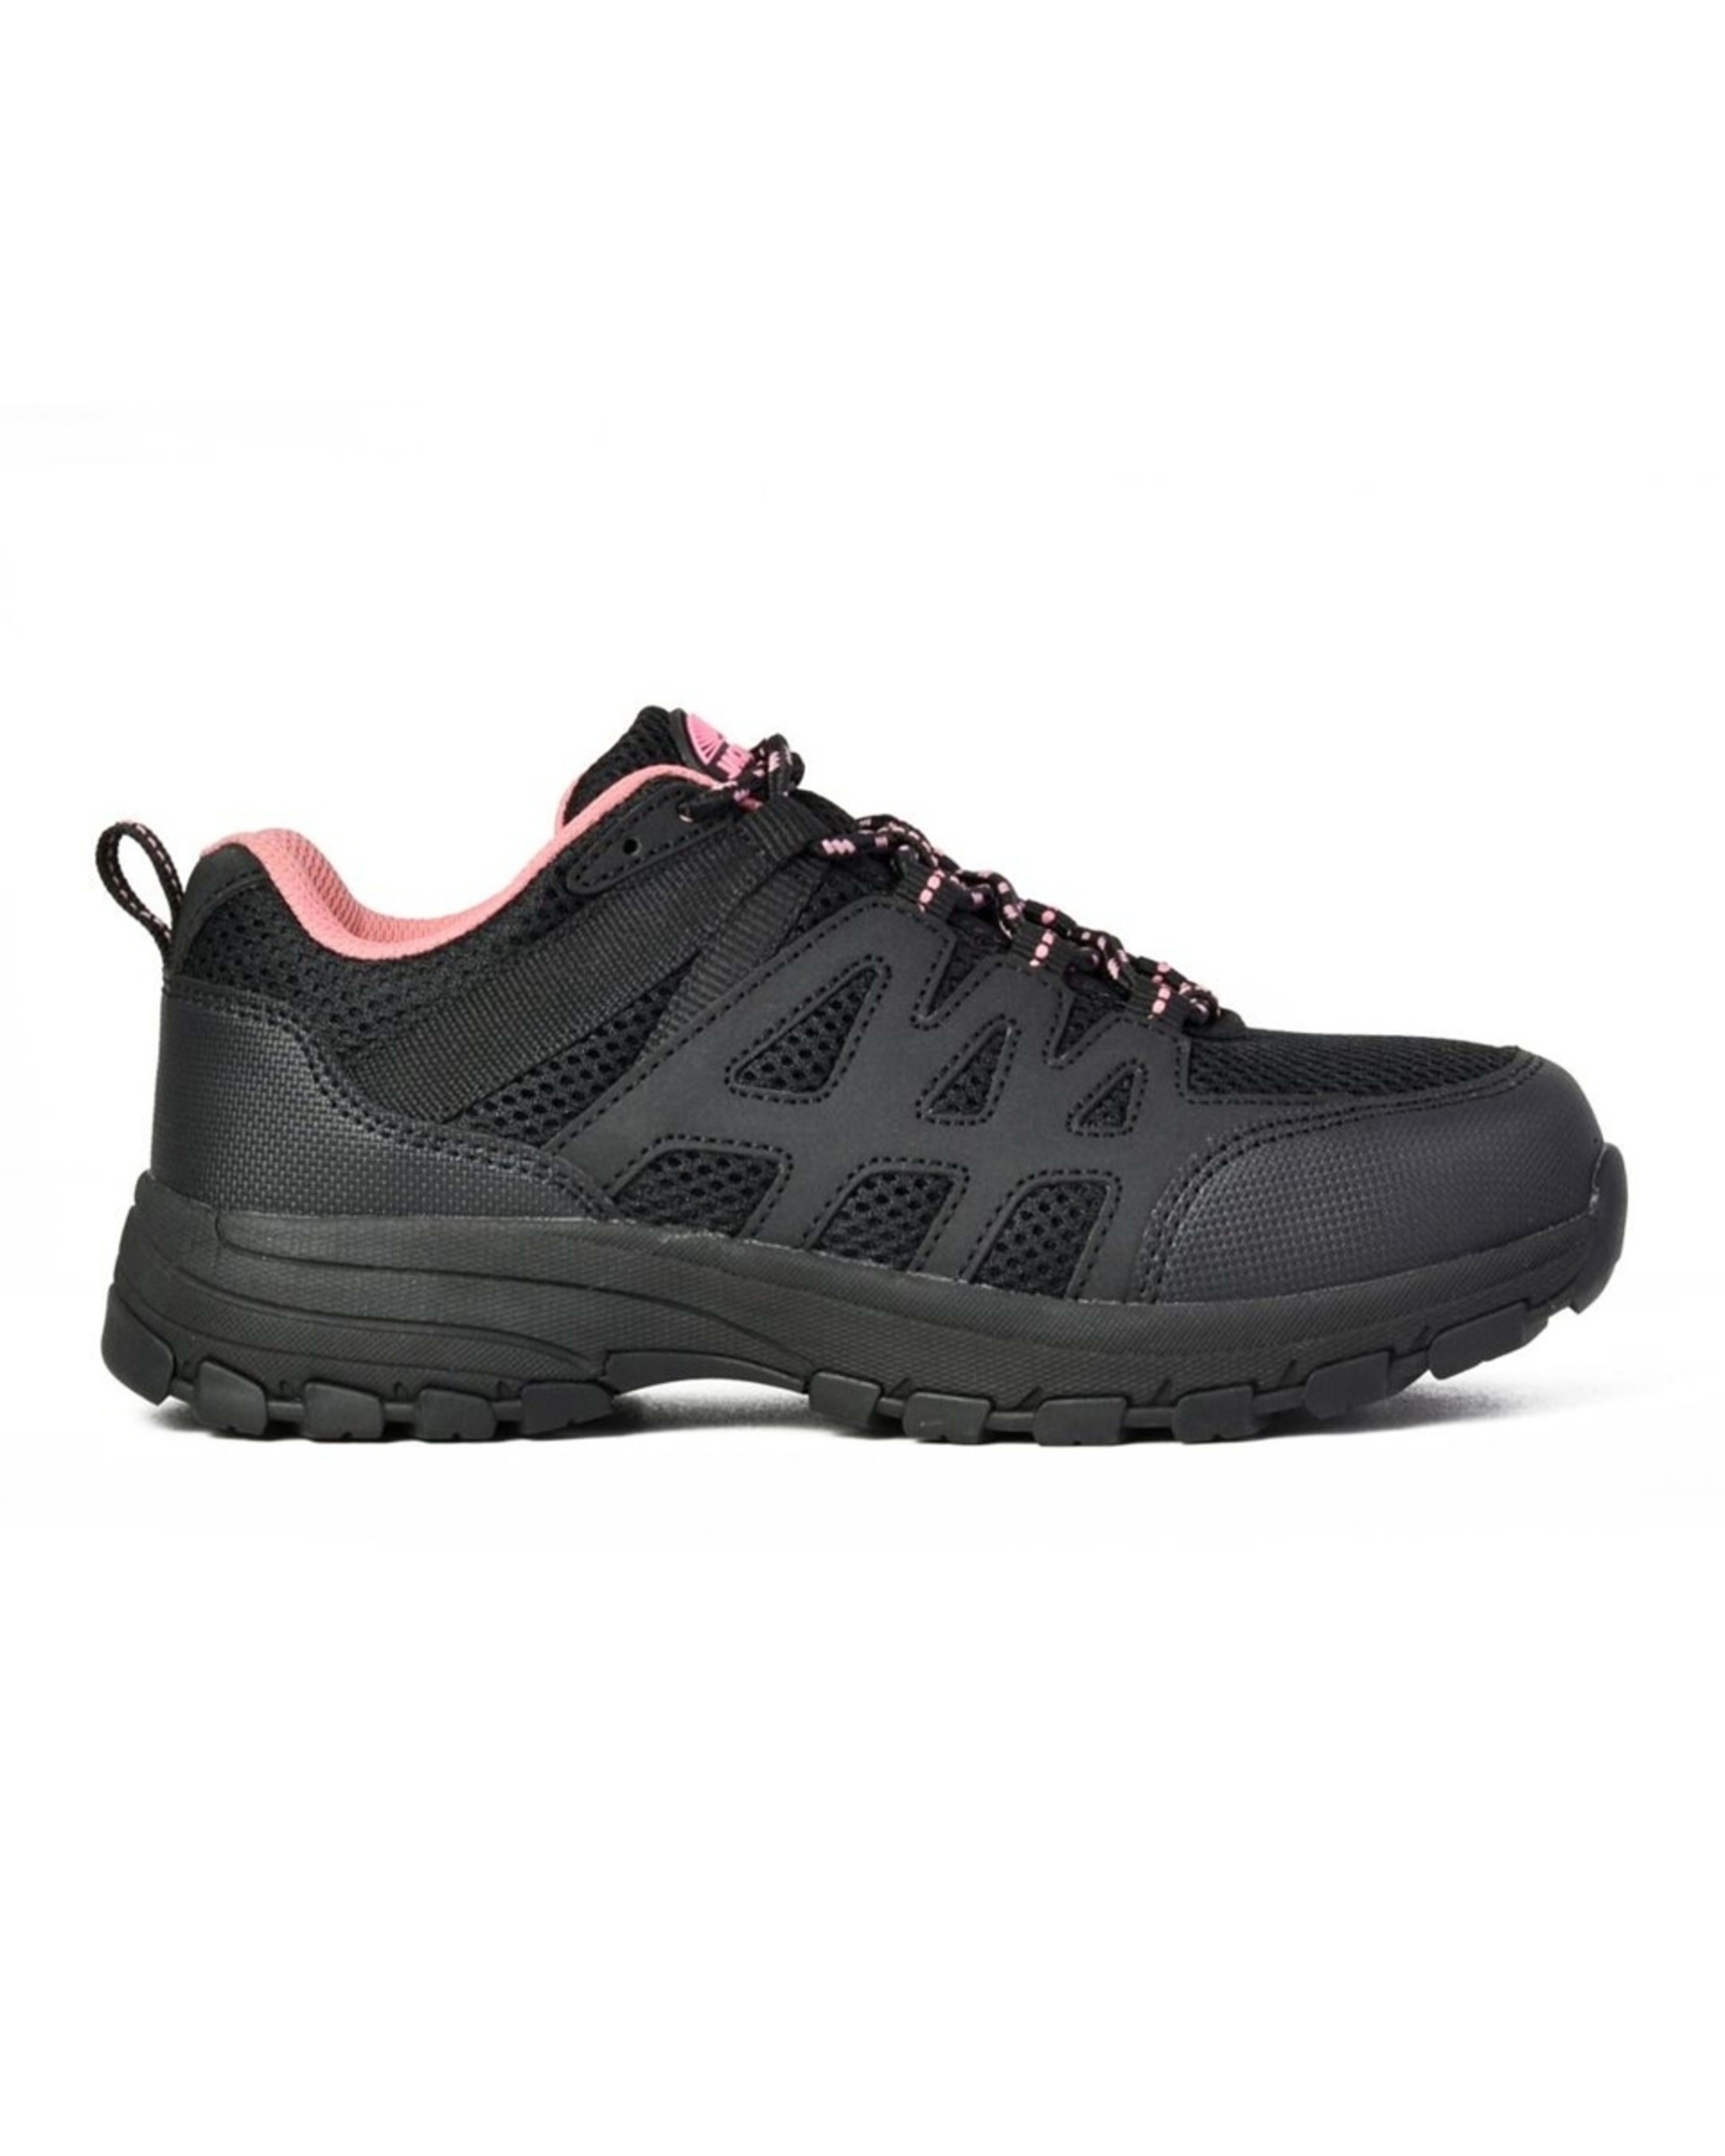 Safety Lace Up Sneakers - Kmart